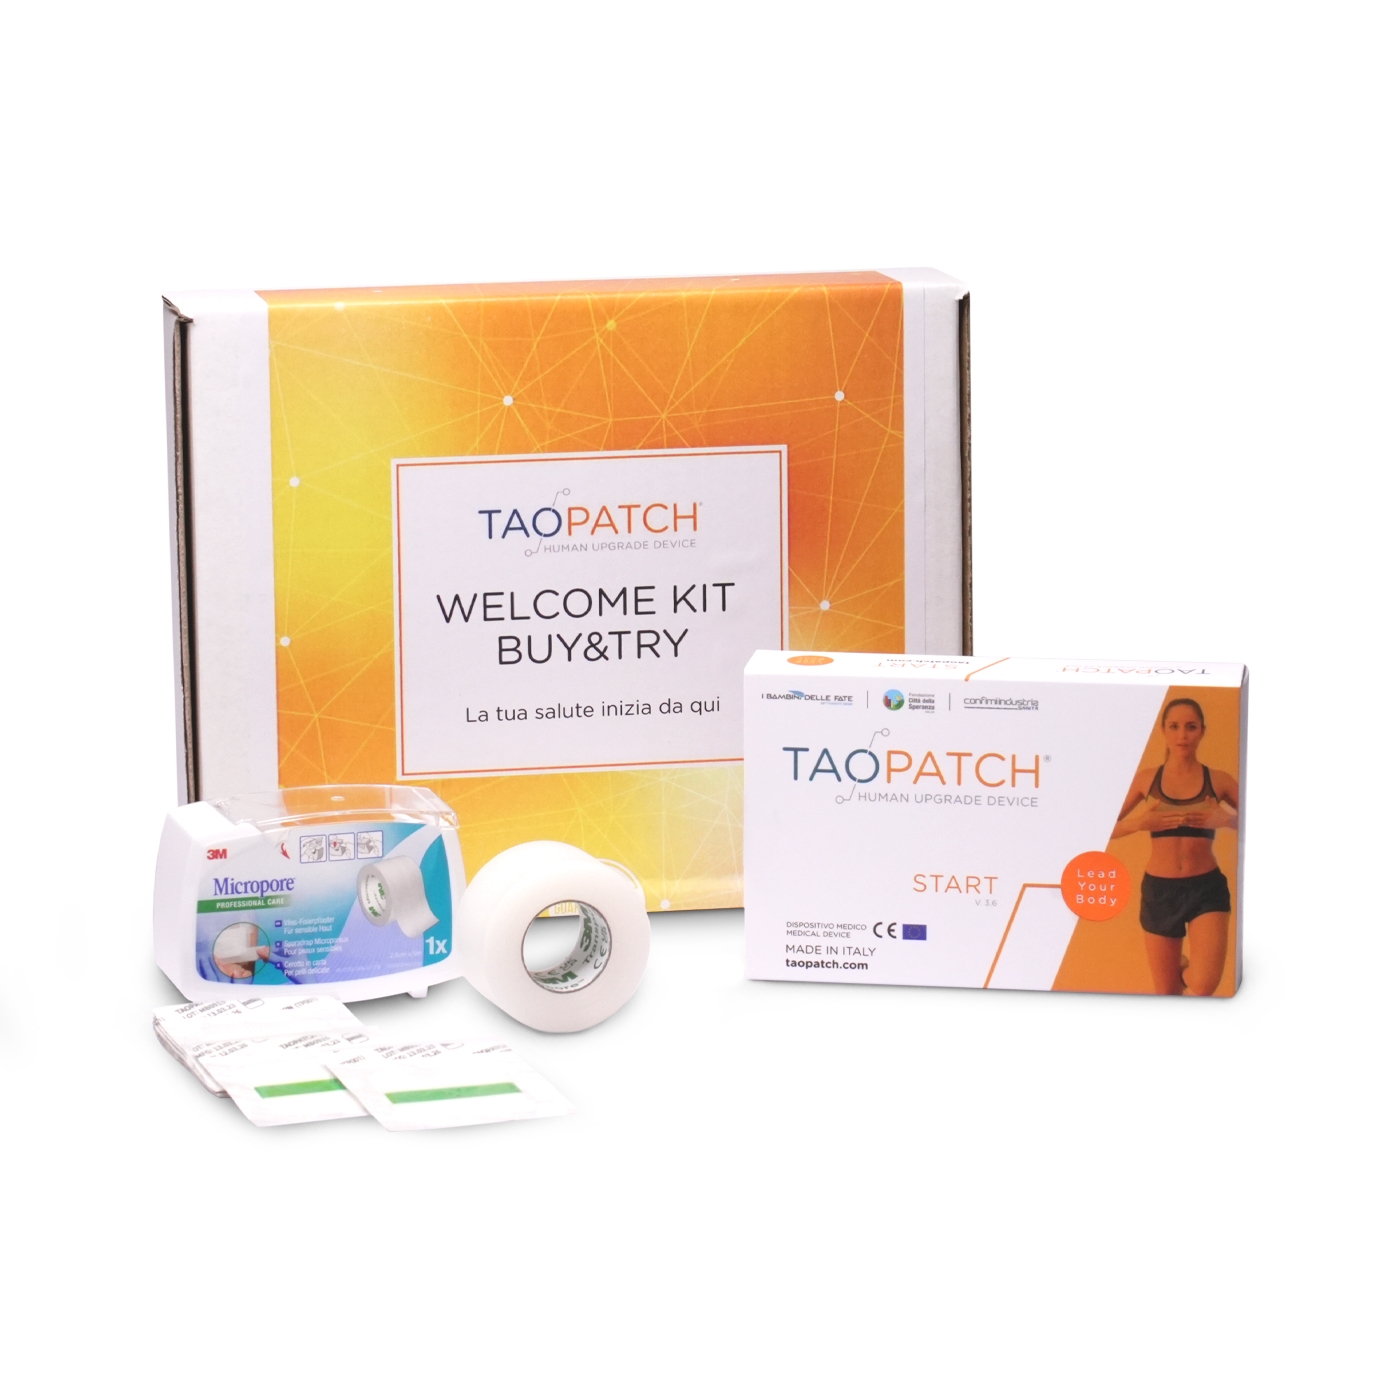 TAOPATCH® START E APPLICAZIONE BUY AND TRY